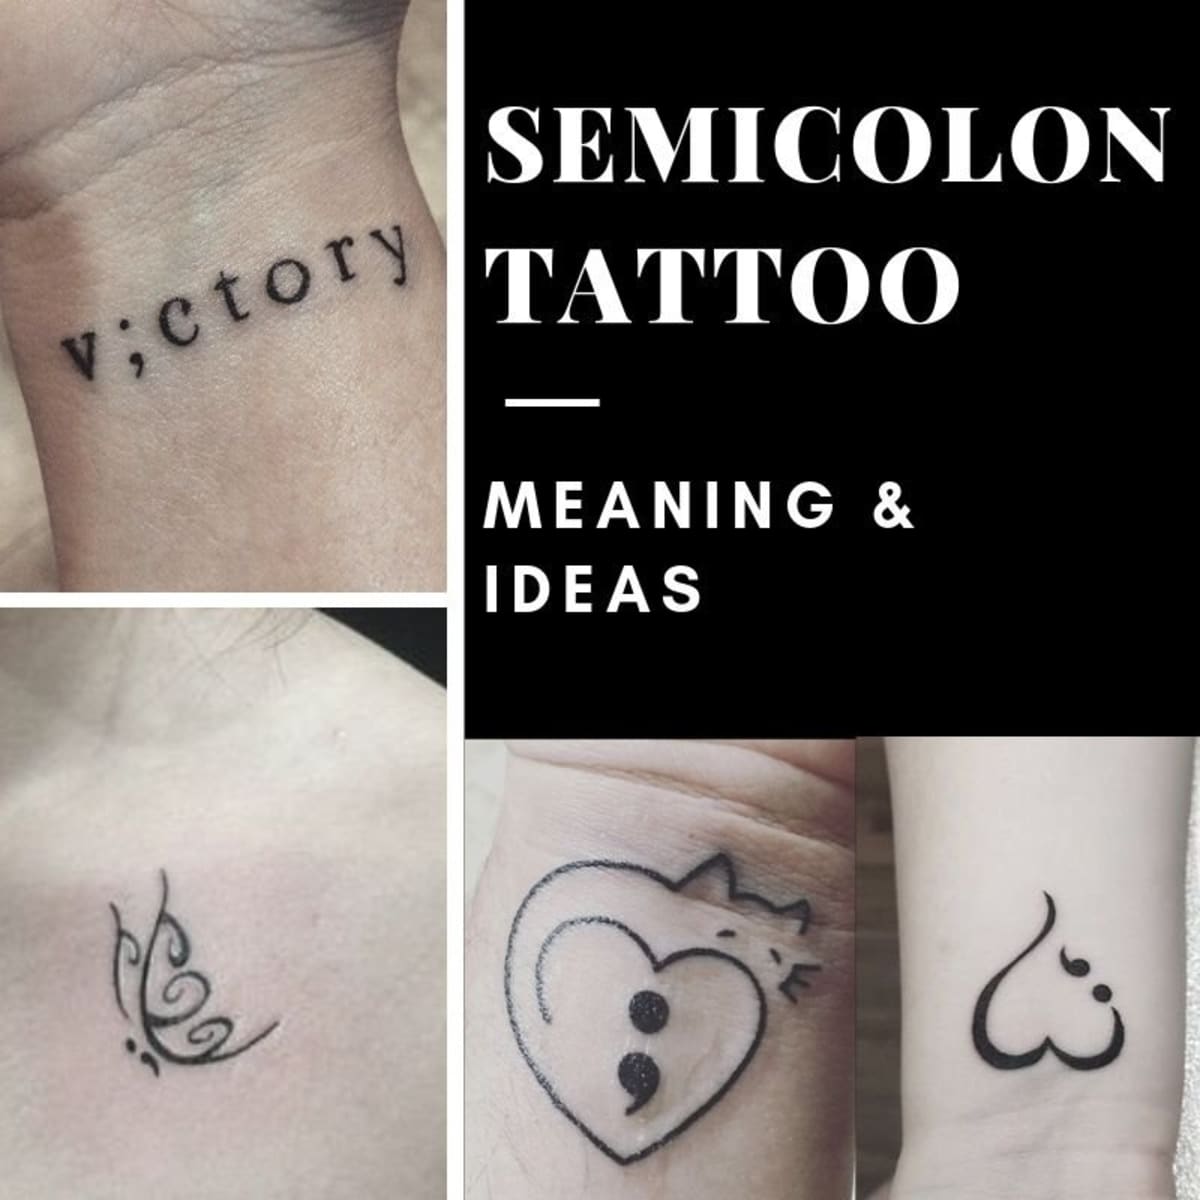 Semicolon Tattoo Meaning Ideas and Pictures  TatRing